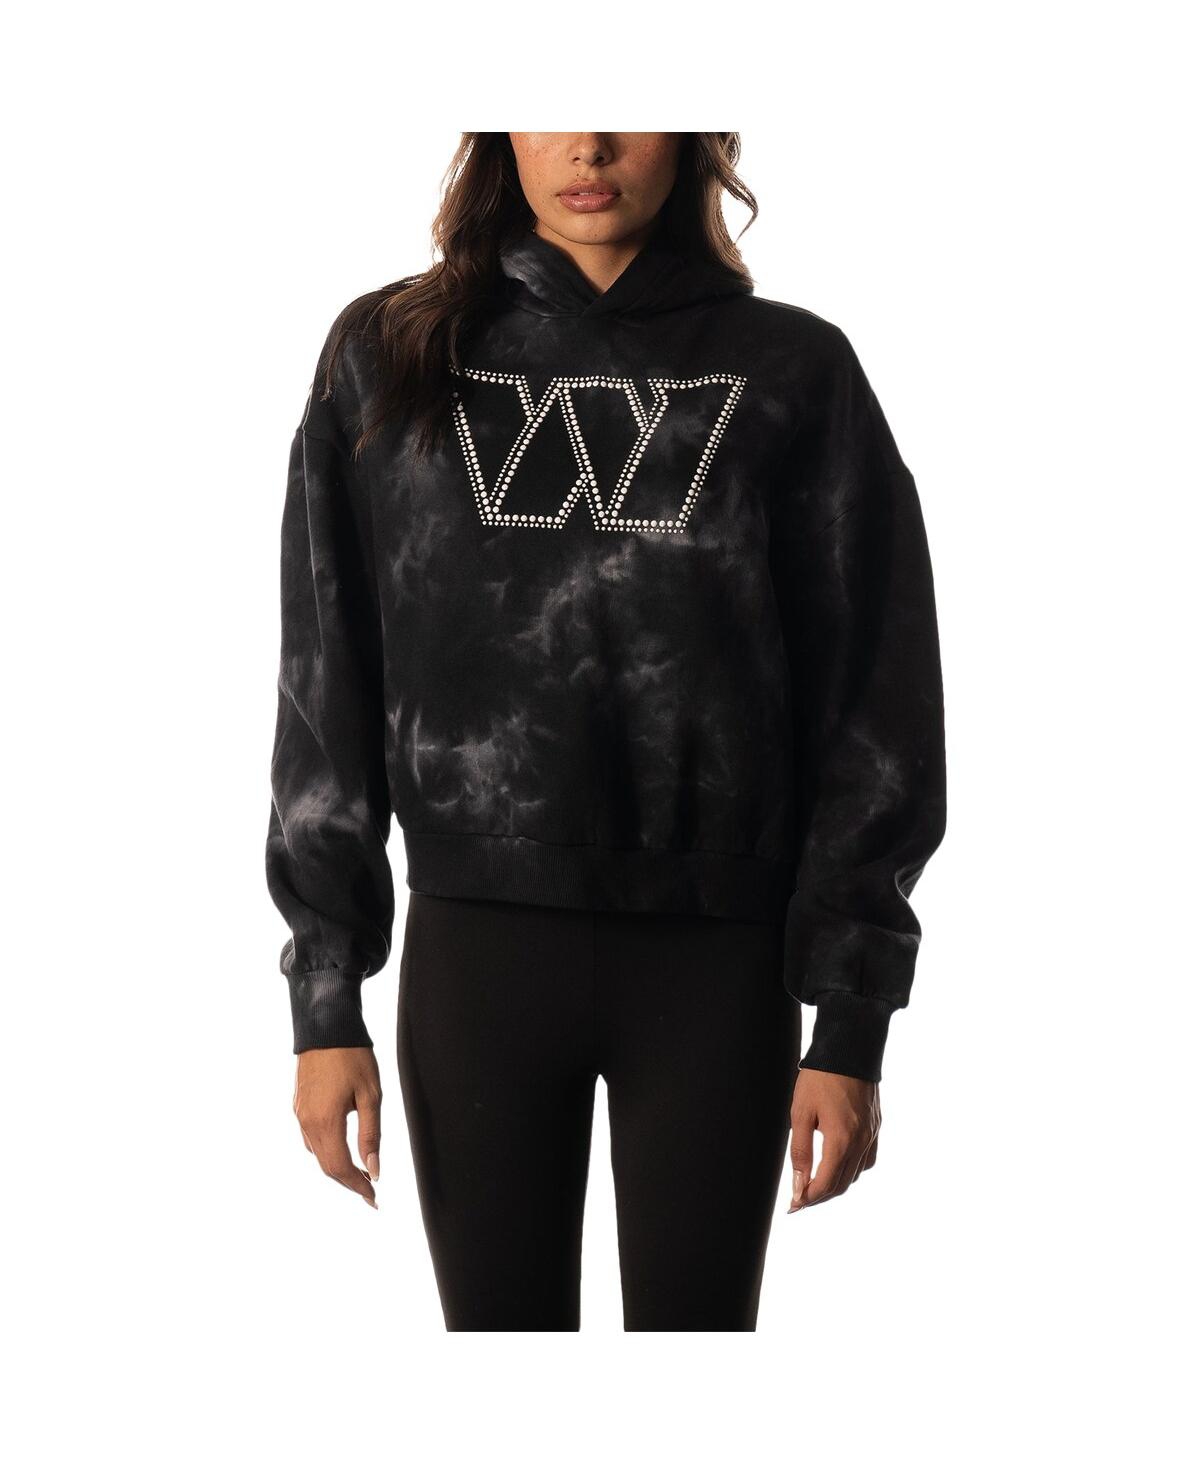 The Wild Collective Women's  Black Washington Commanders Tie-dye Cropped Pullover Hoodie